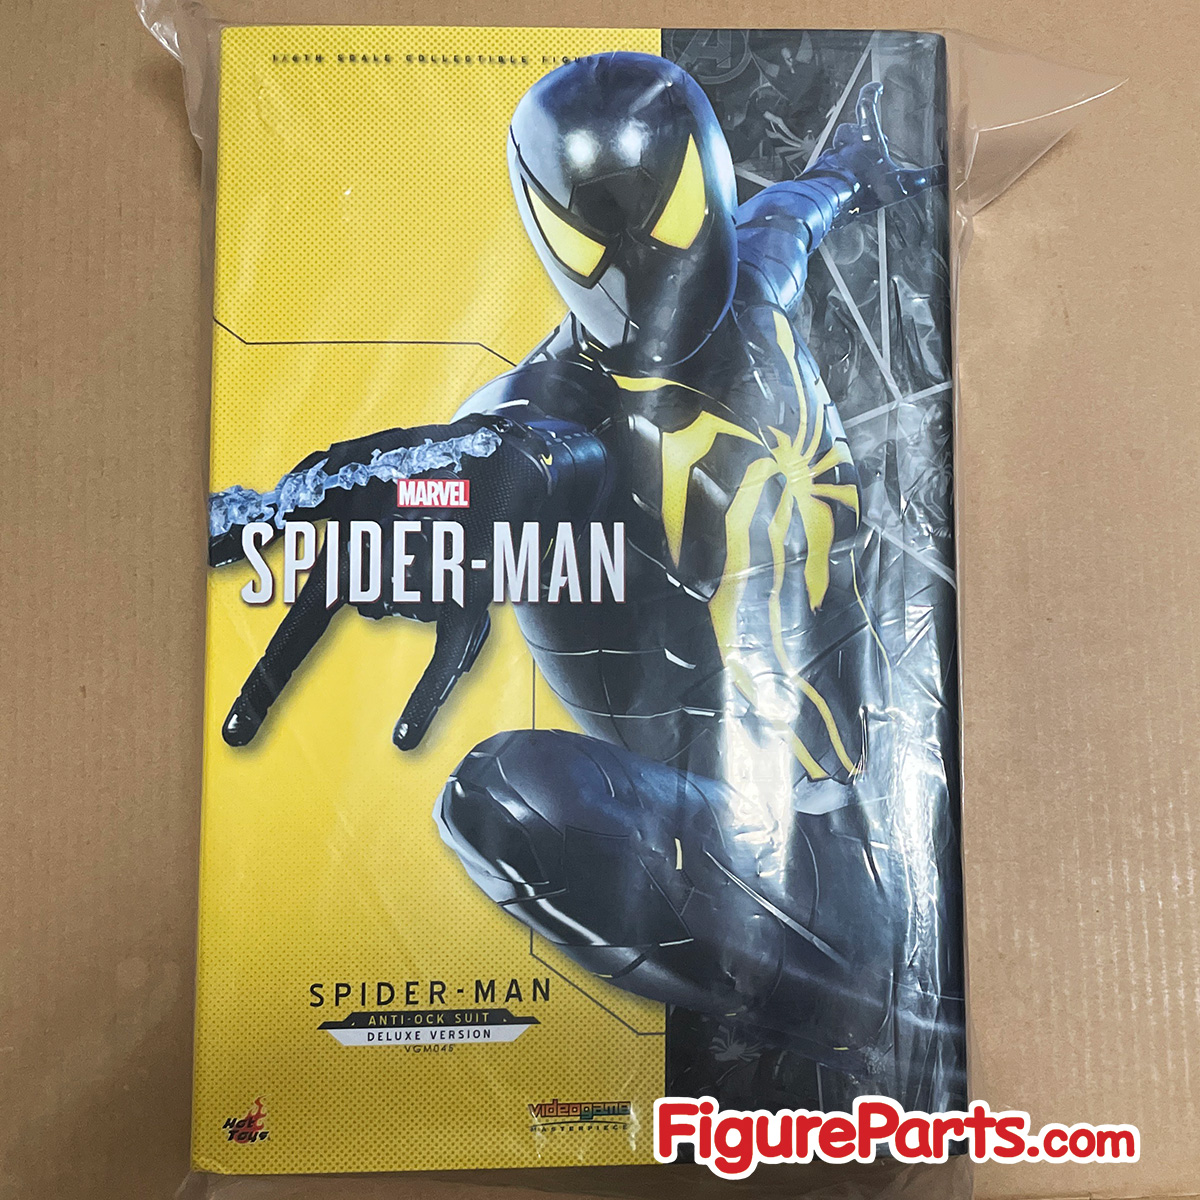 Spiderman Anti-Ock Suit Deluxe Version - Spiderman video game - Hot Toys - vgm45